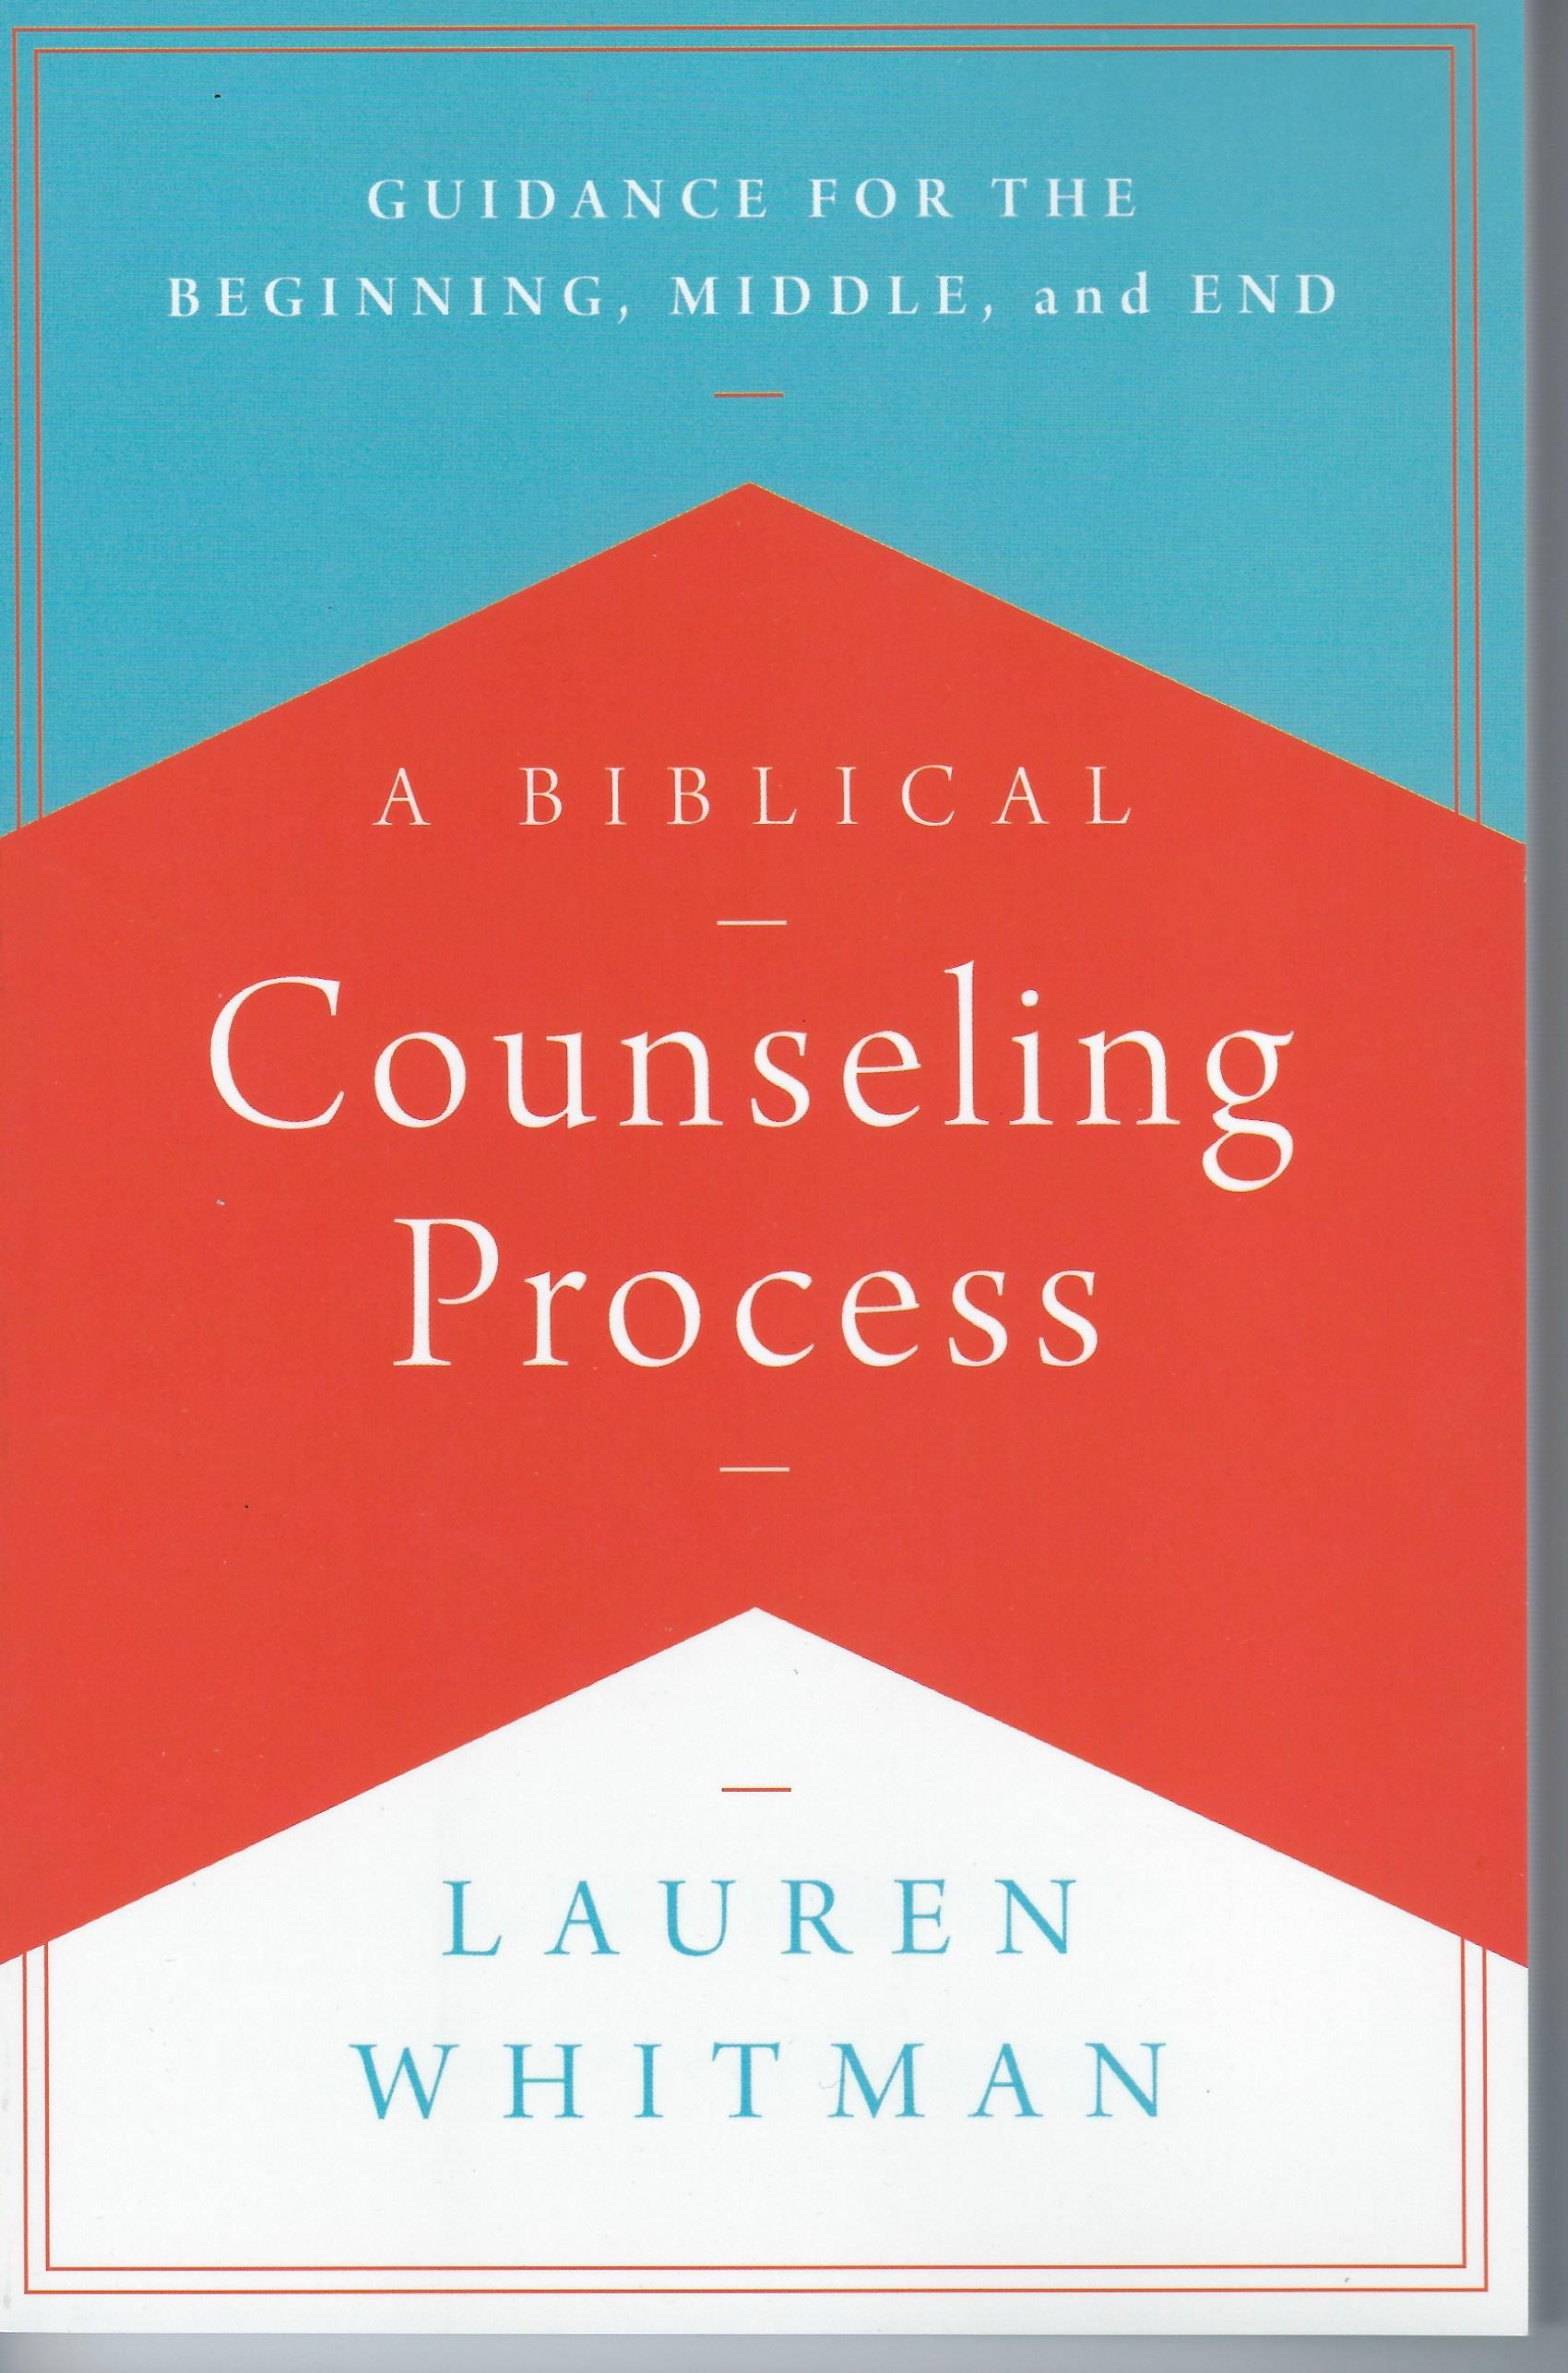 A BIBLICAL COUNSELING PROCESS: GUIDANCE FOR THE BEGINNING